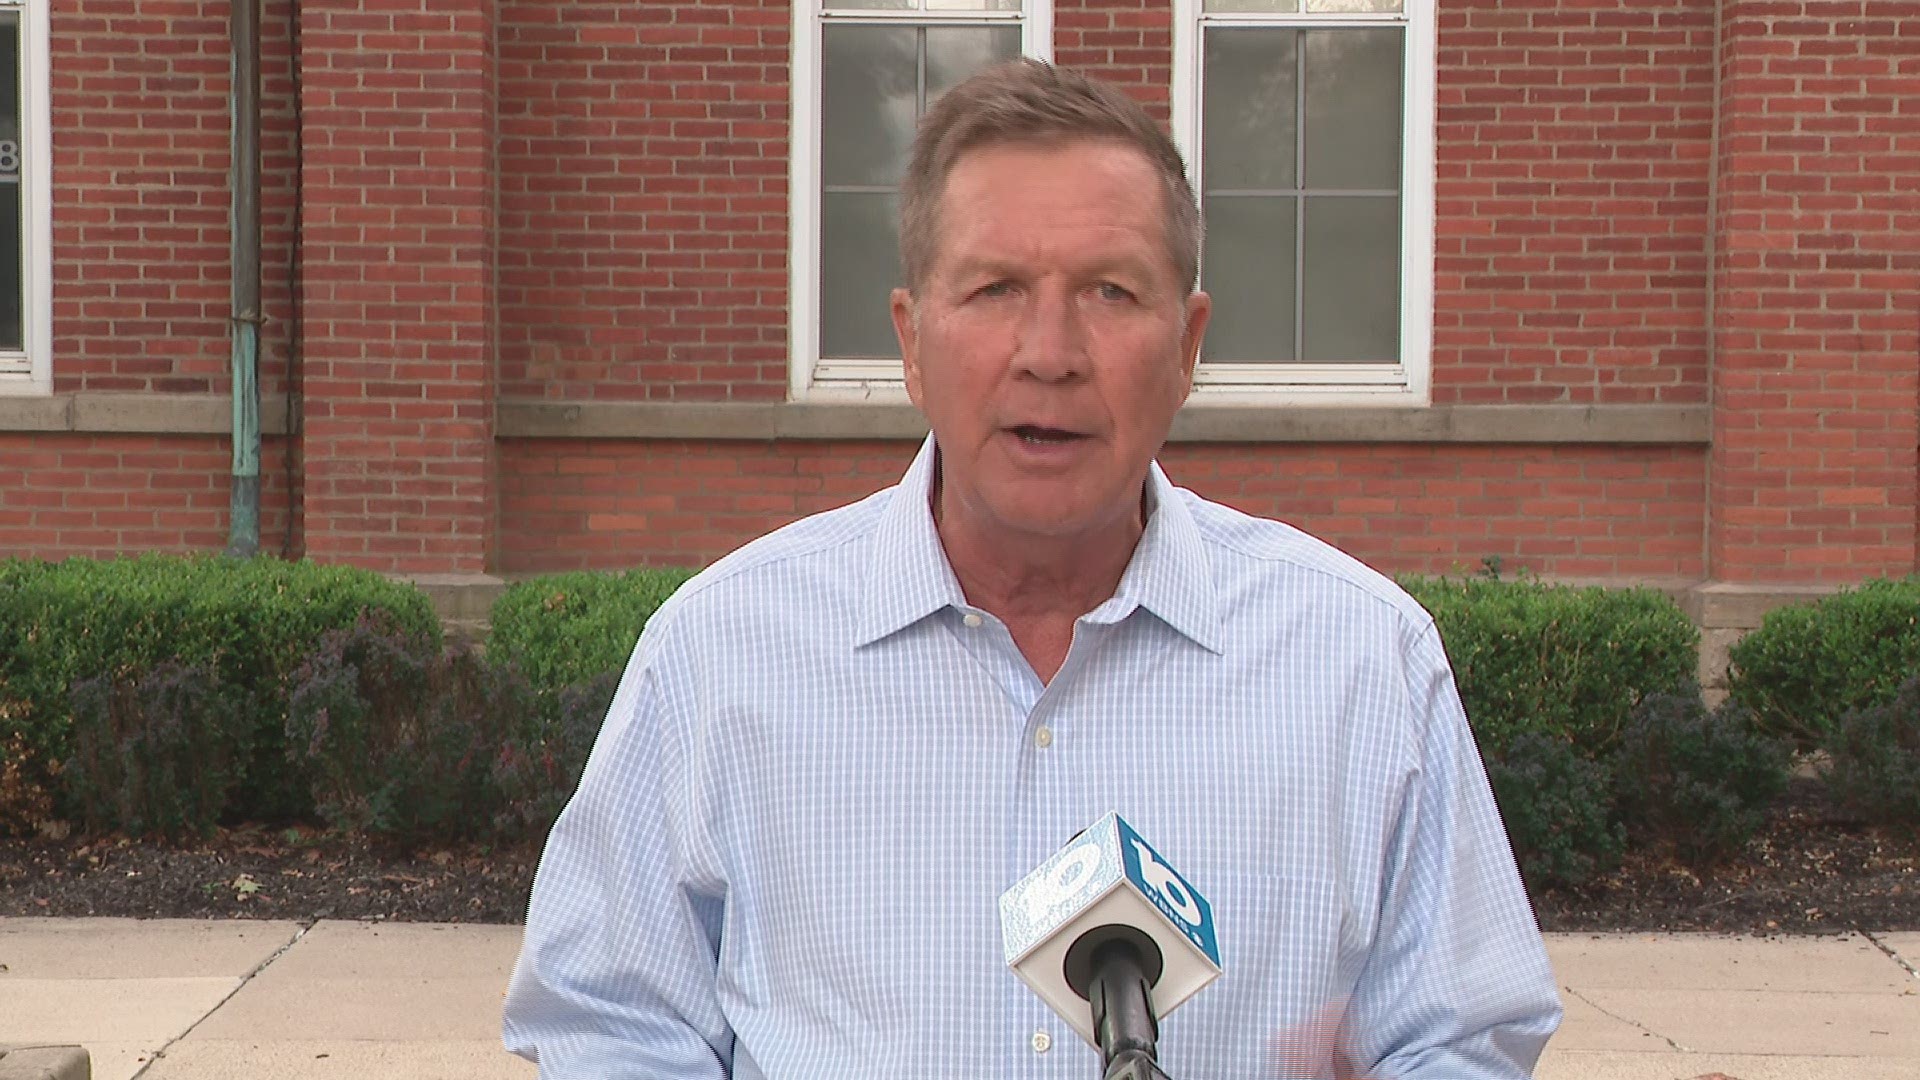 Former Ohio Gov. John Kasich talked with 10TV's Angela Reighard ahead of Tuesday night's presidential debate.